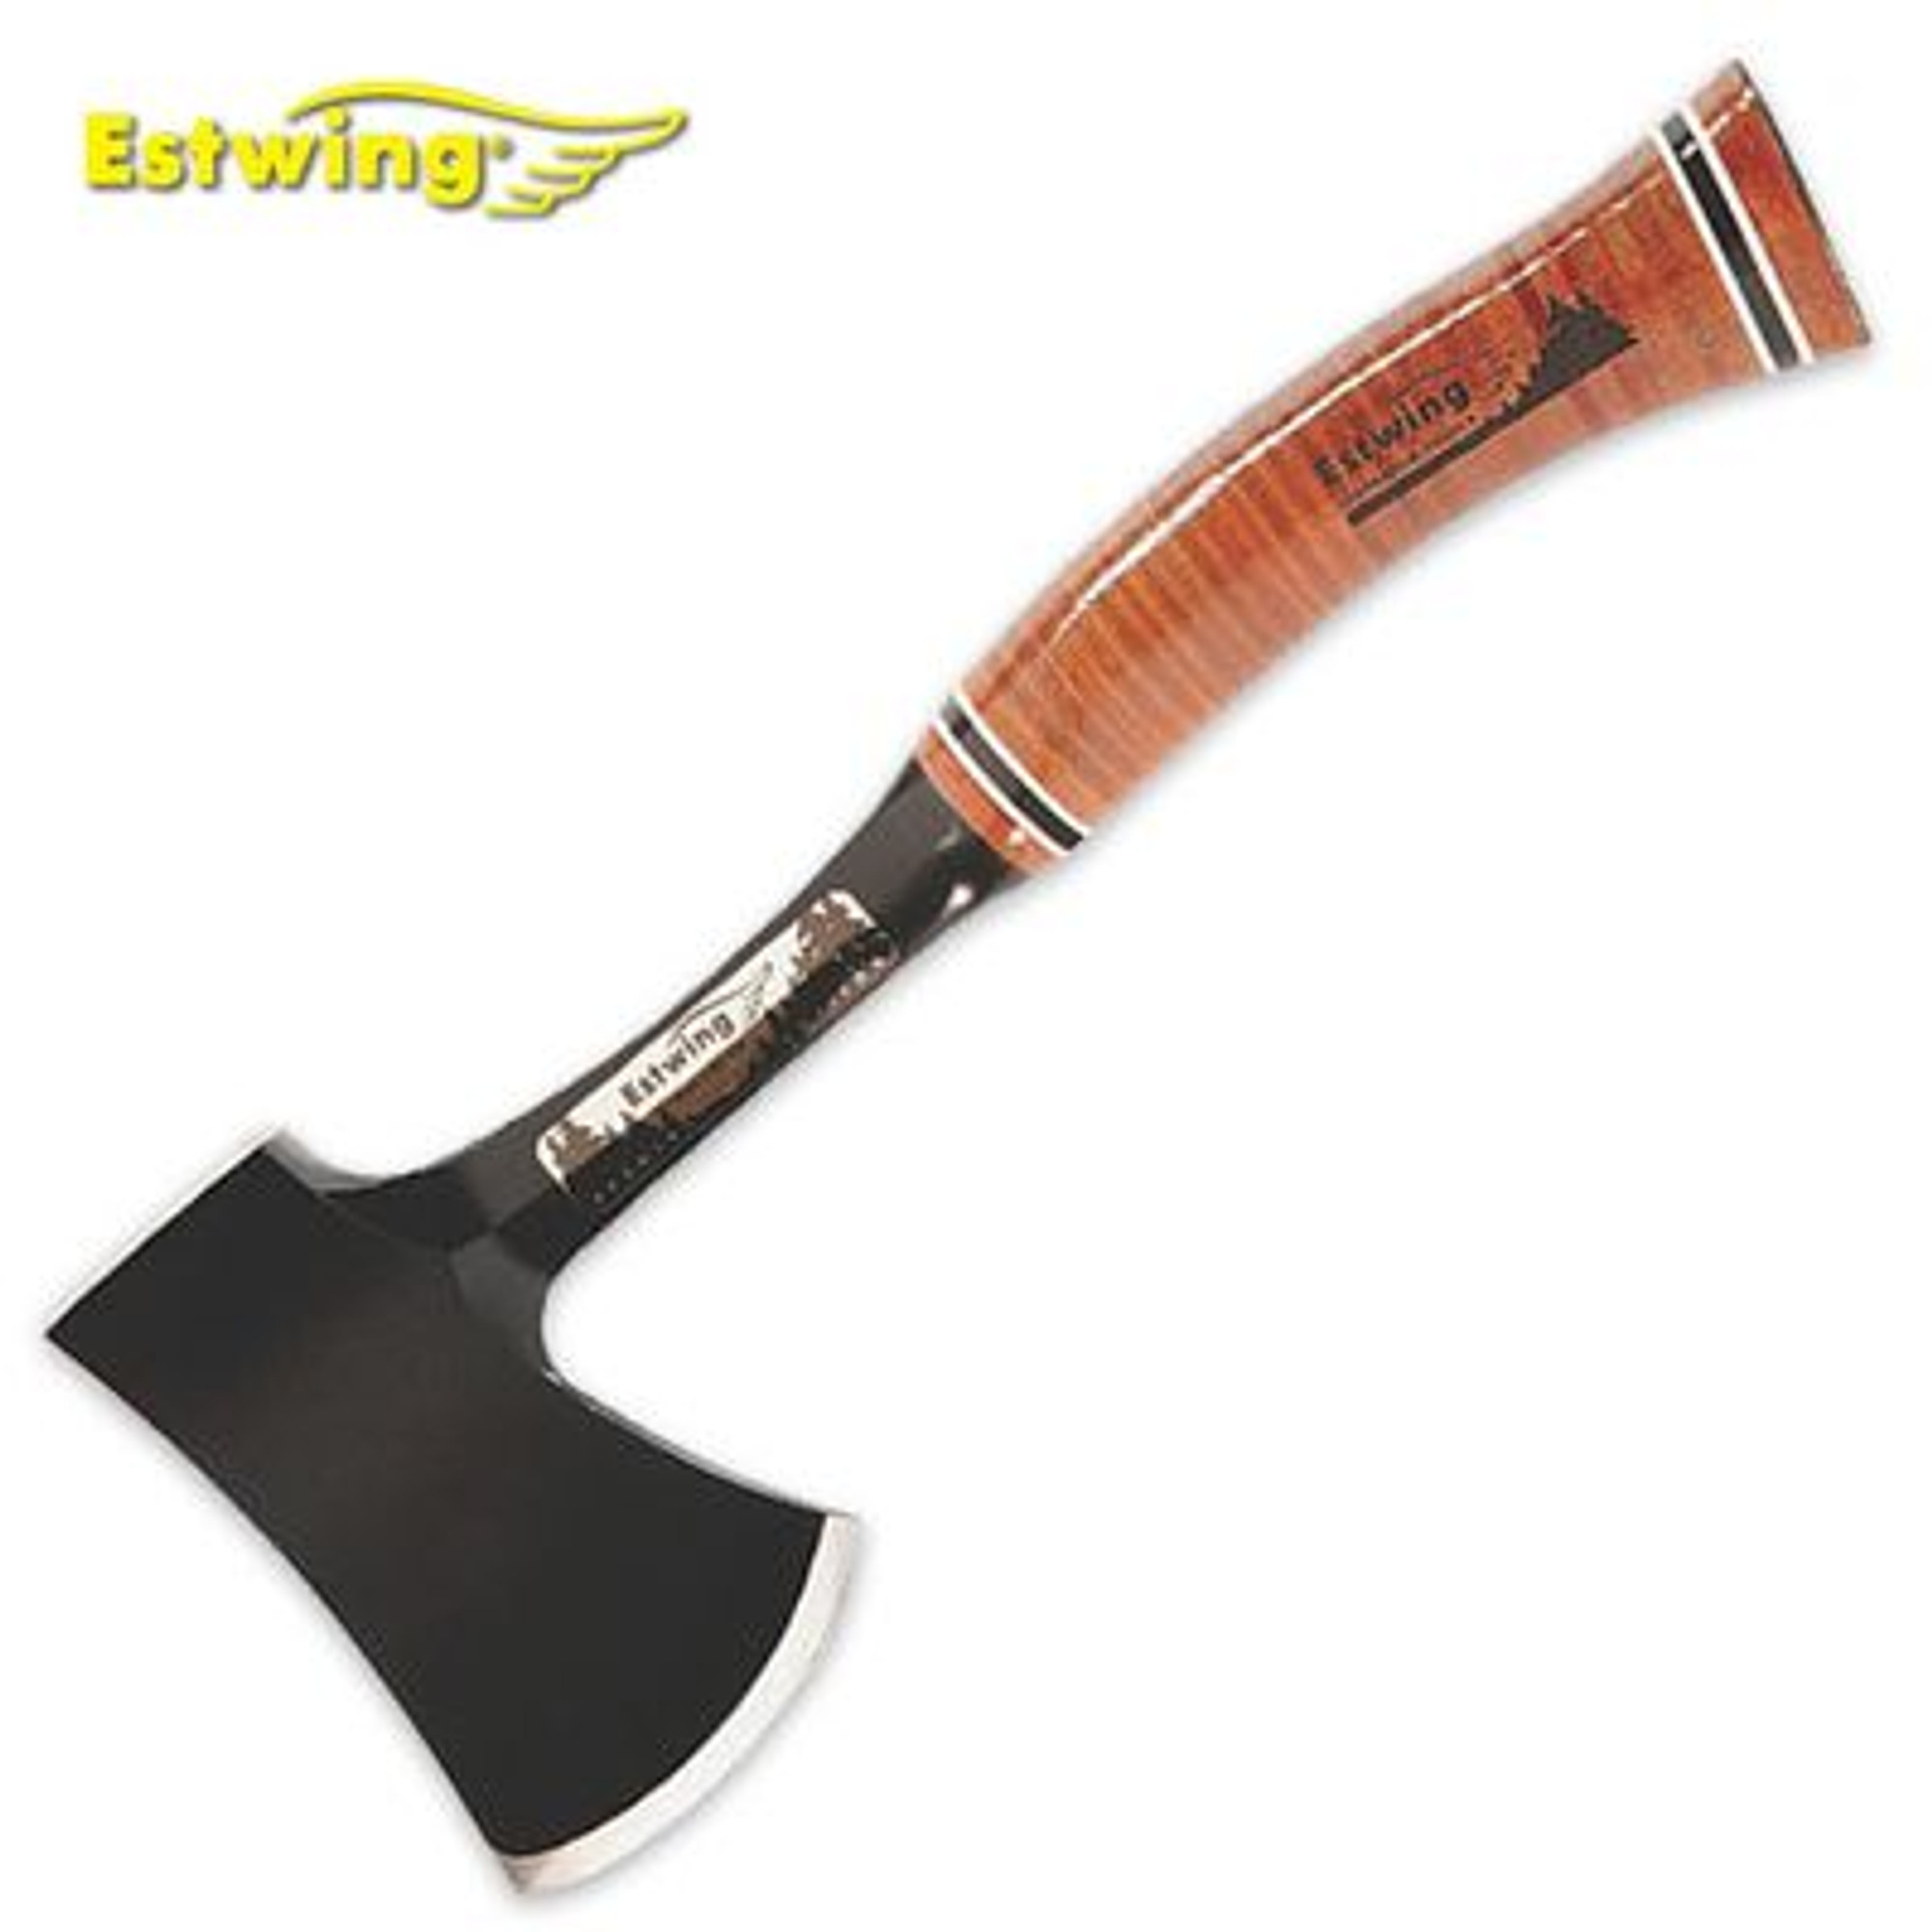 Estwing Special Edition Sportsmans Axe w/ Leather Grip